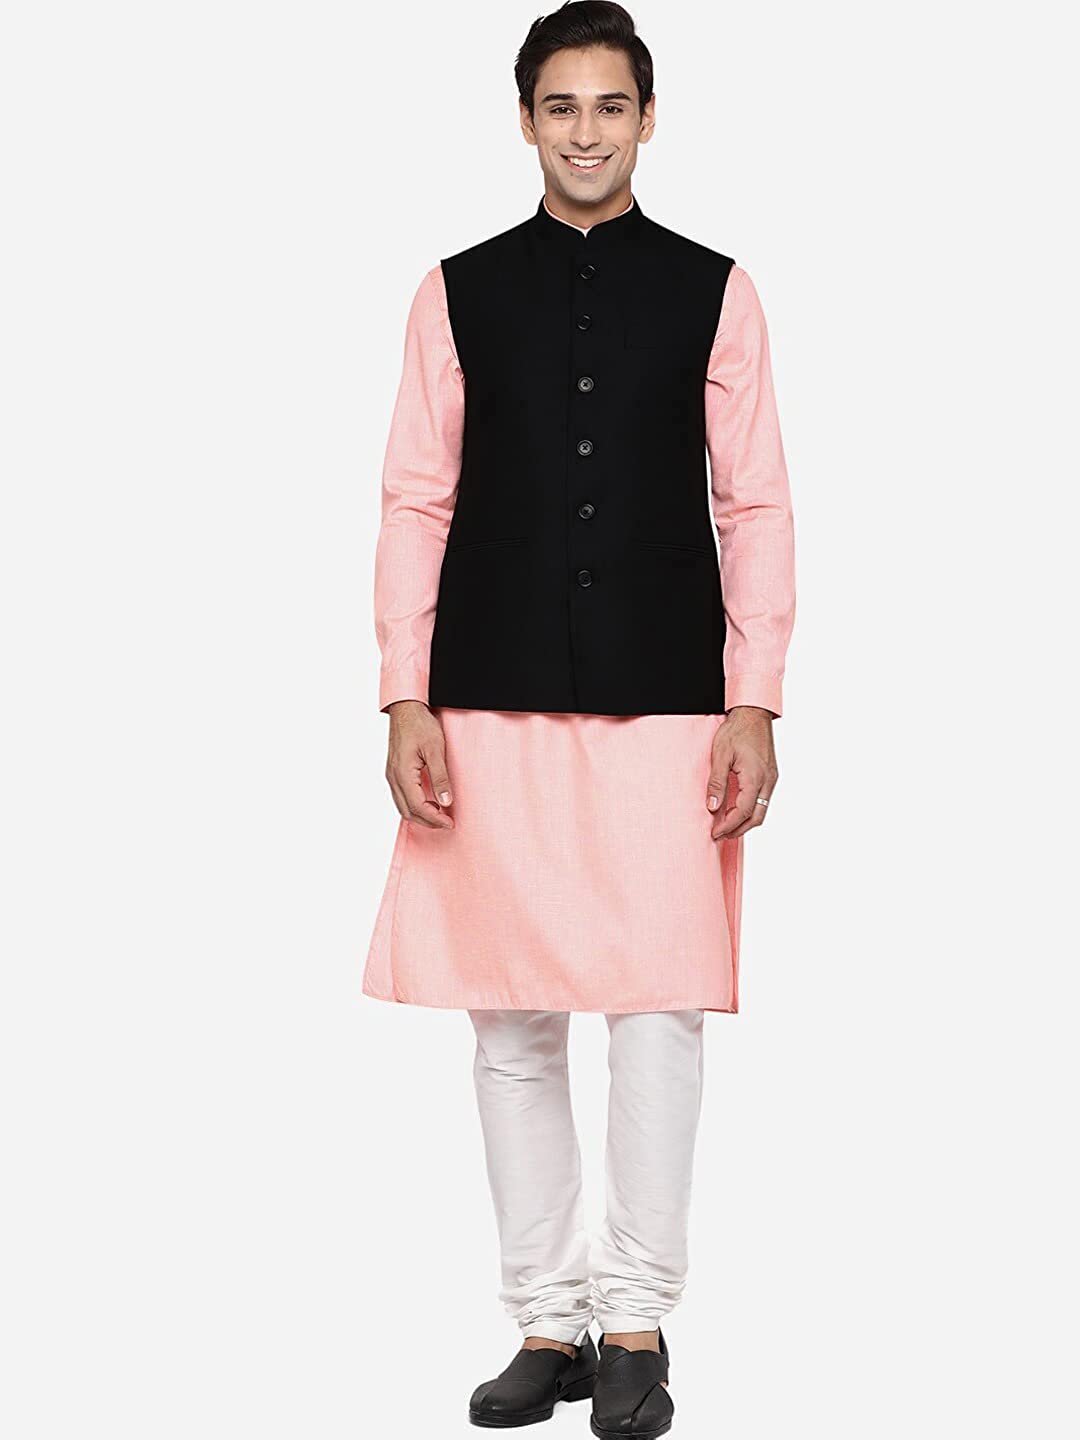 Best Nehru Jackets Under 3000: 6 Best Nehru Jackets Under 3000 in India for  a Dapper Desi Look - The Economic Times